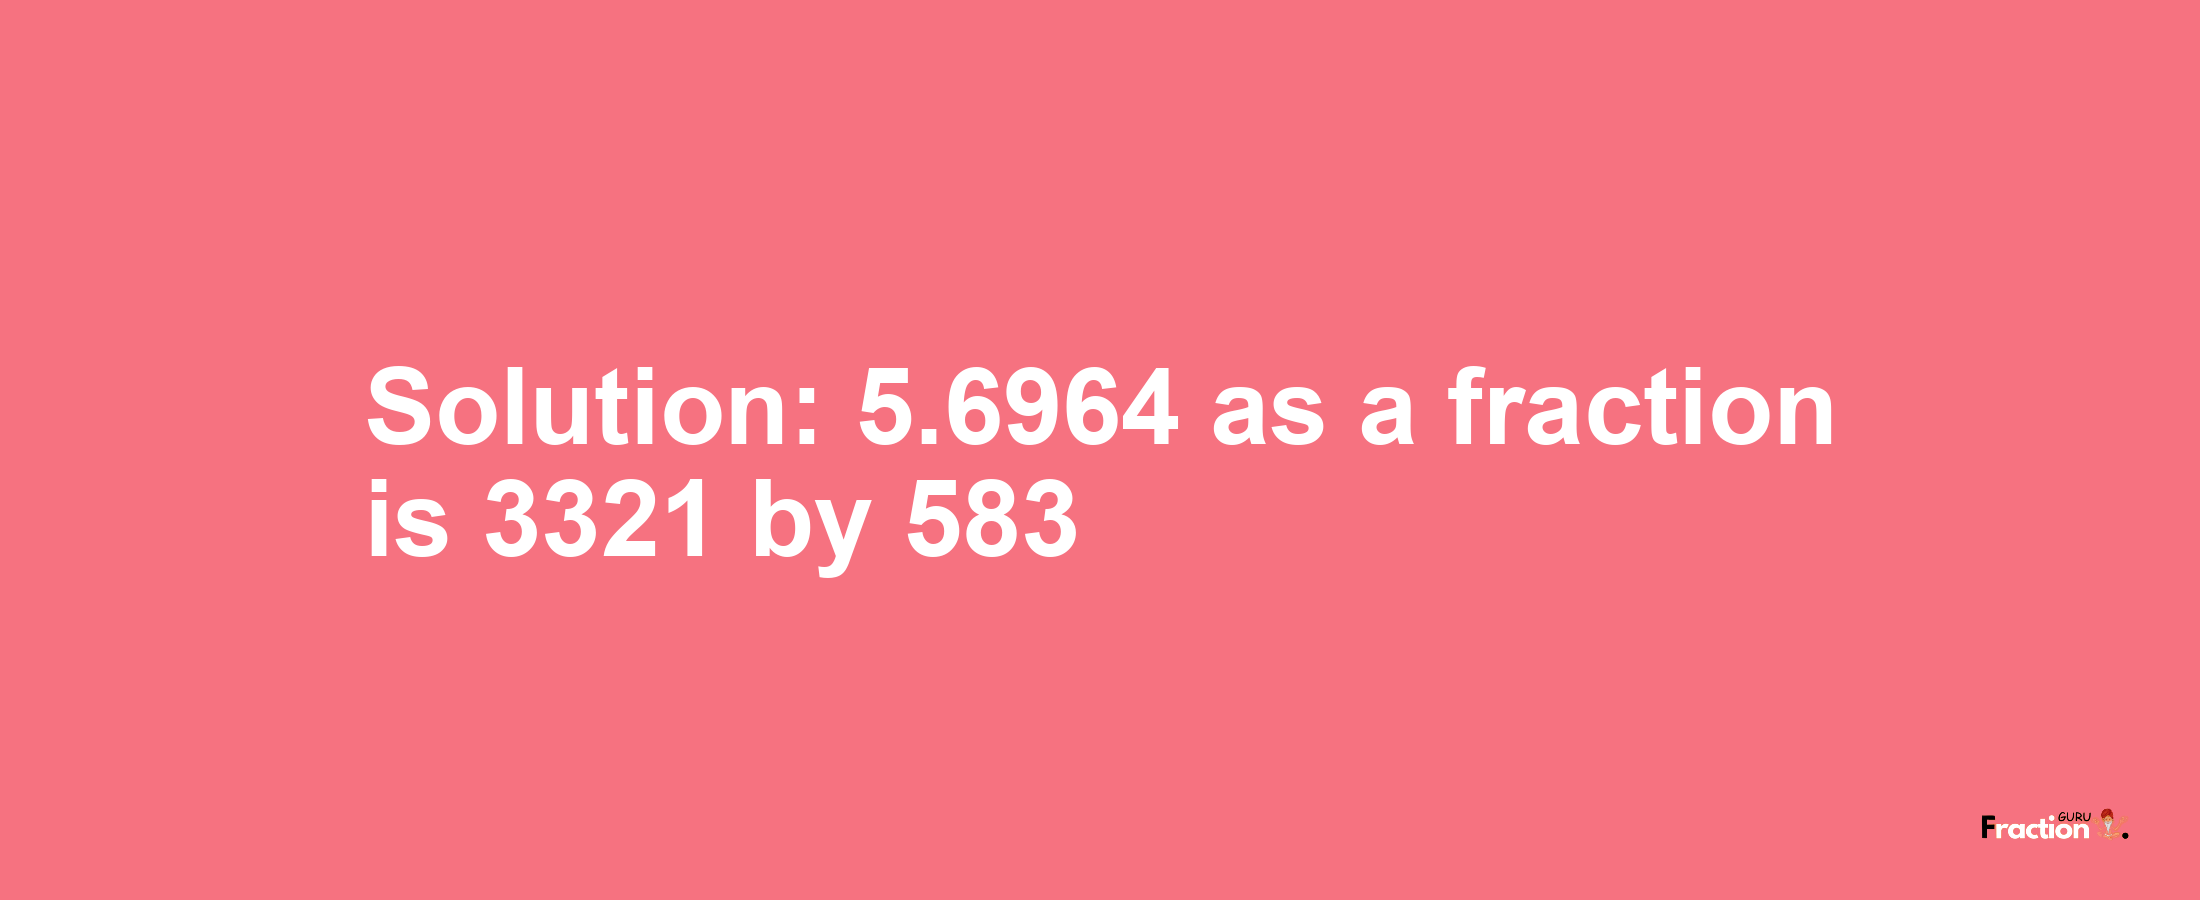 Solution:5.6964 as a fraction is 3321/583